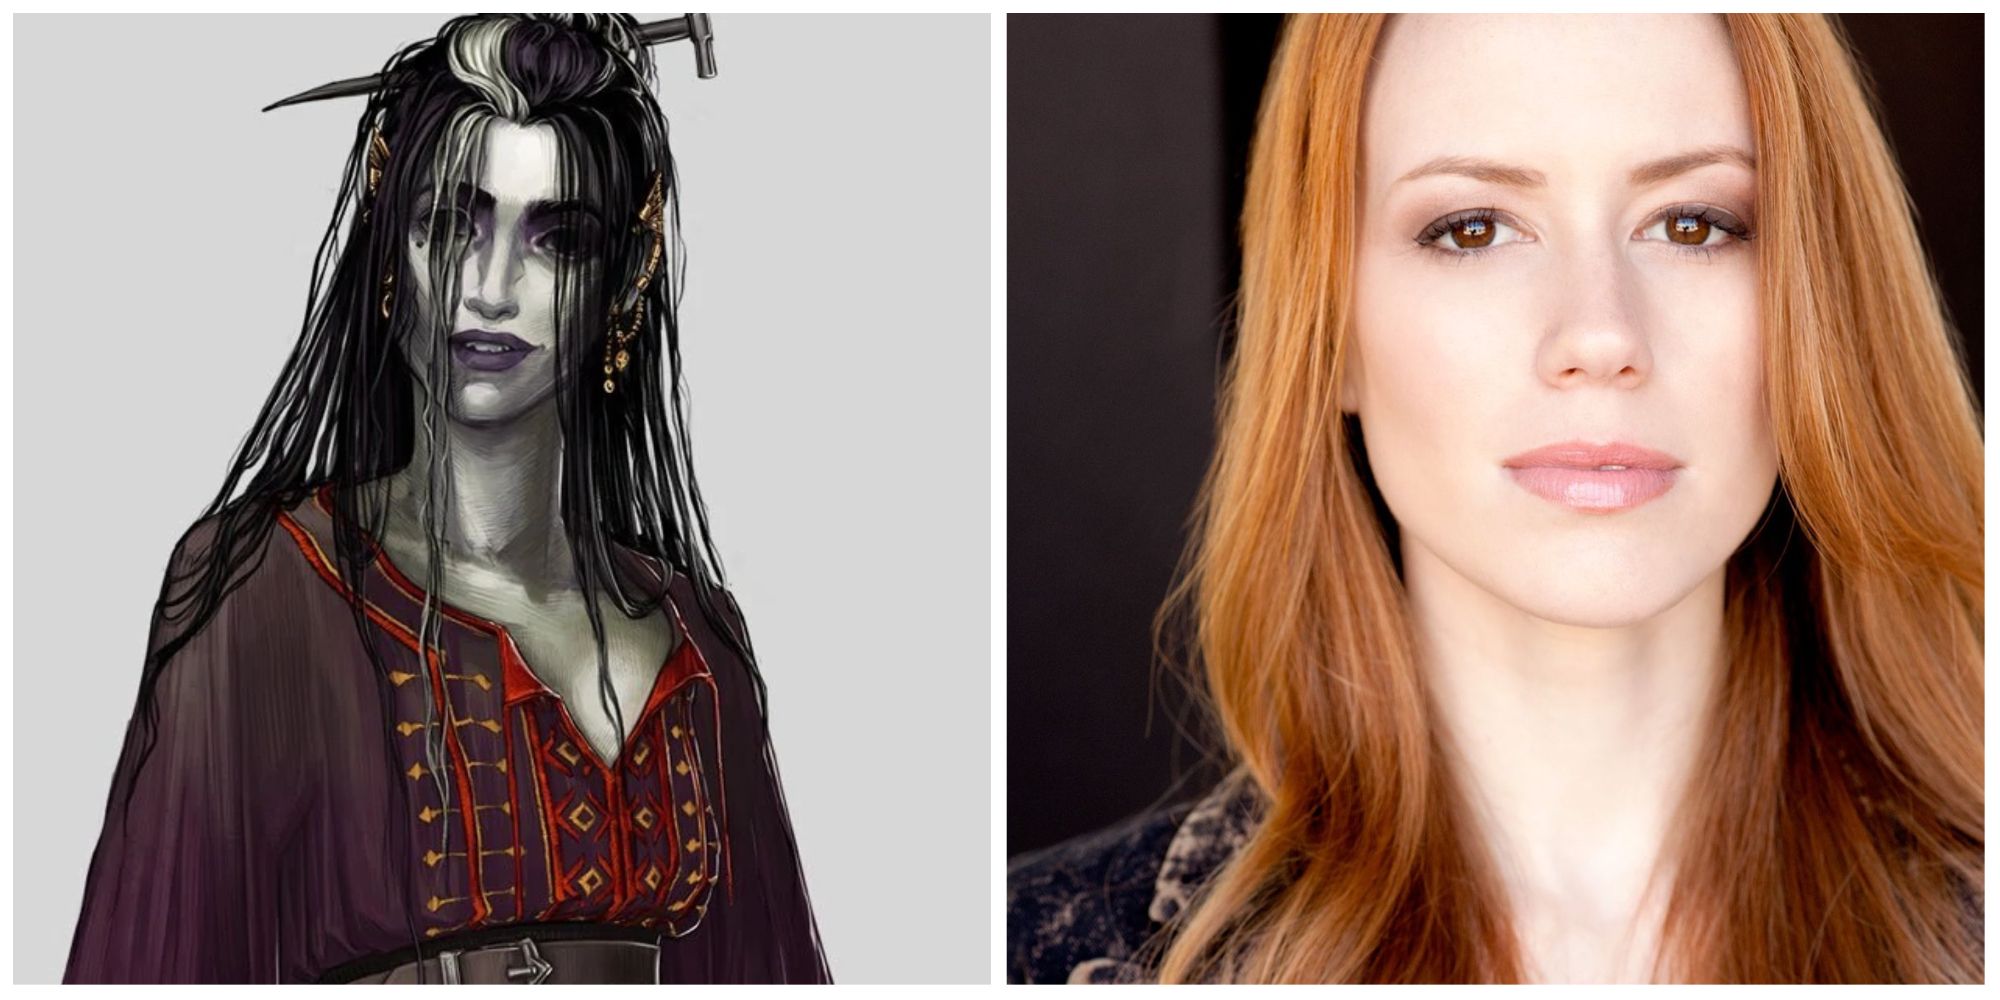 Laudna of Critical Role on the left, Marisha Ray on the right